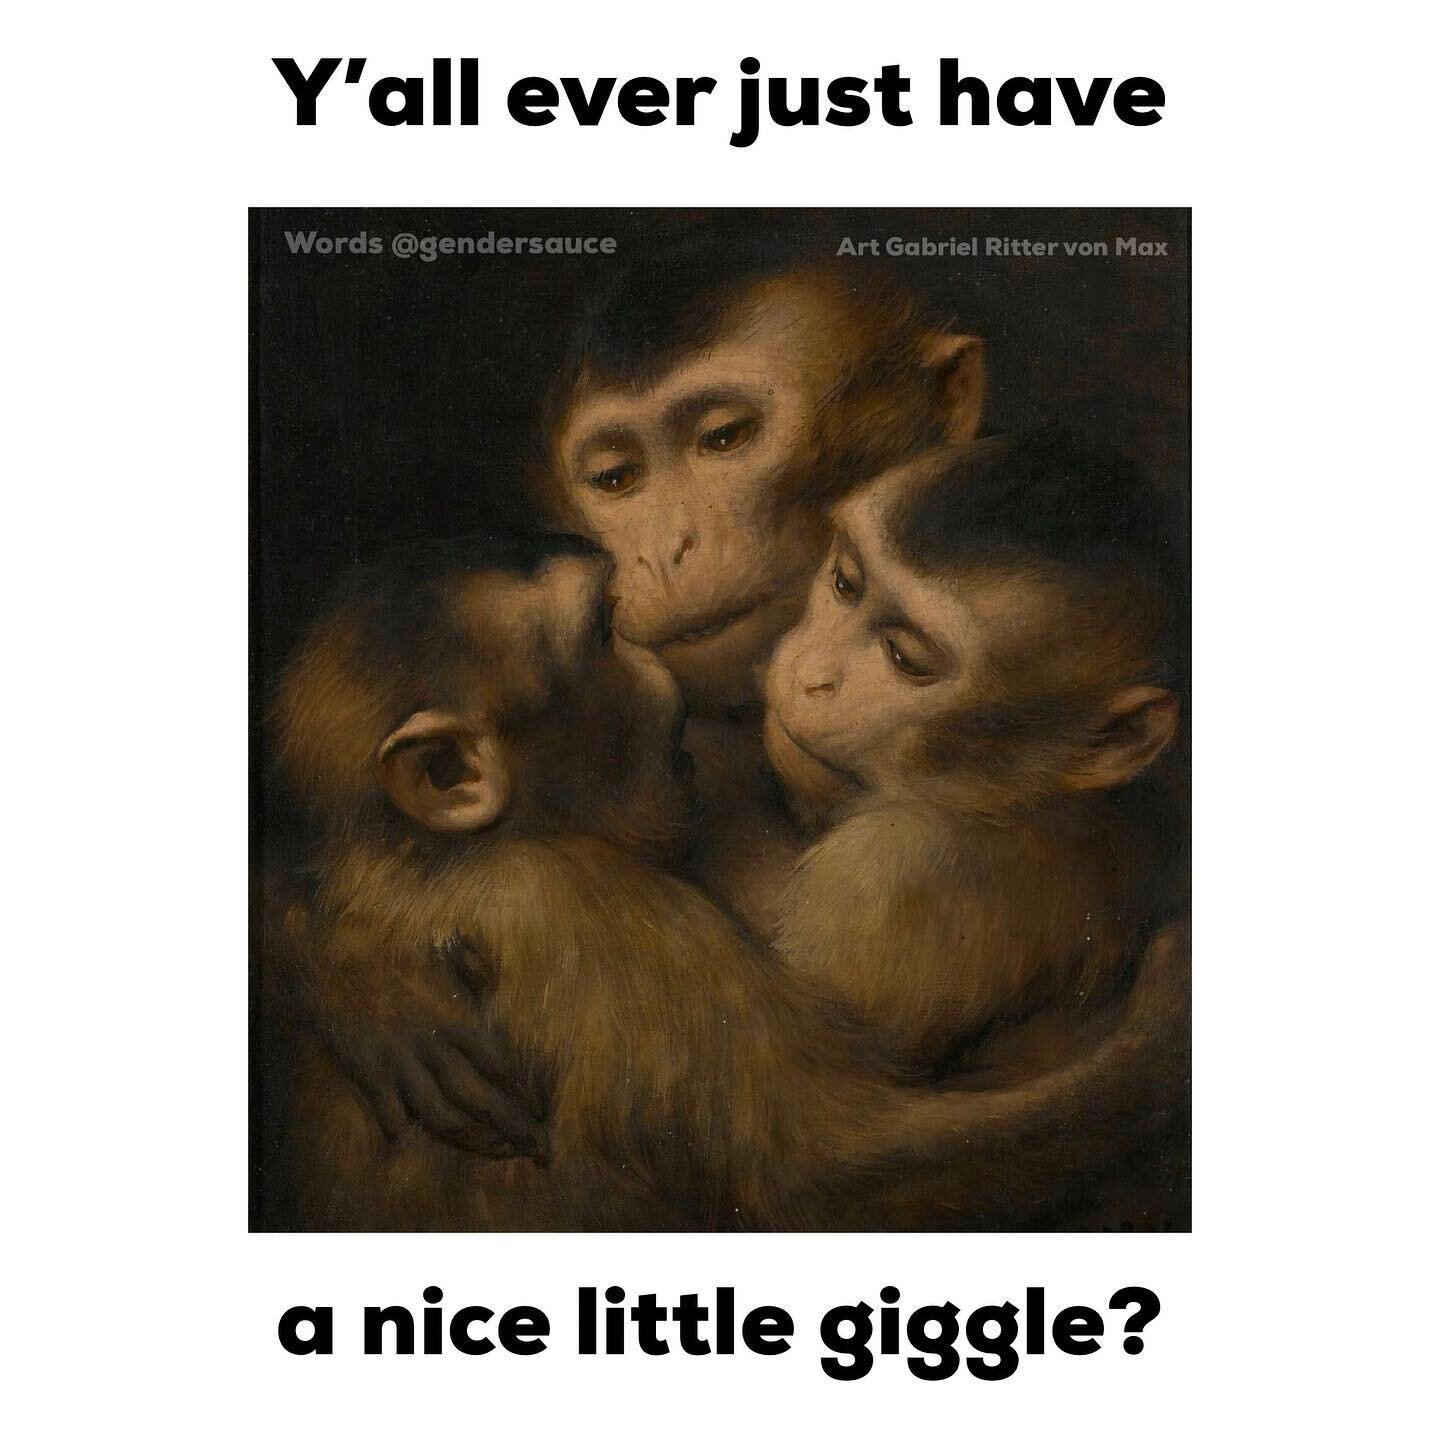 Hehehehe 😎🖕🔥 hehehehehehehe 🐒 #CuspyWholesomeMemes. Image by Gabriel Ritter von Max. Image description will be pinned in the comments as soon as it&rsquo;s complete.